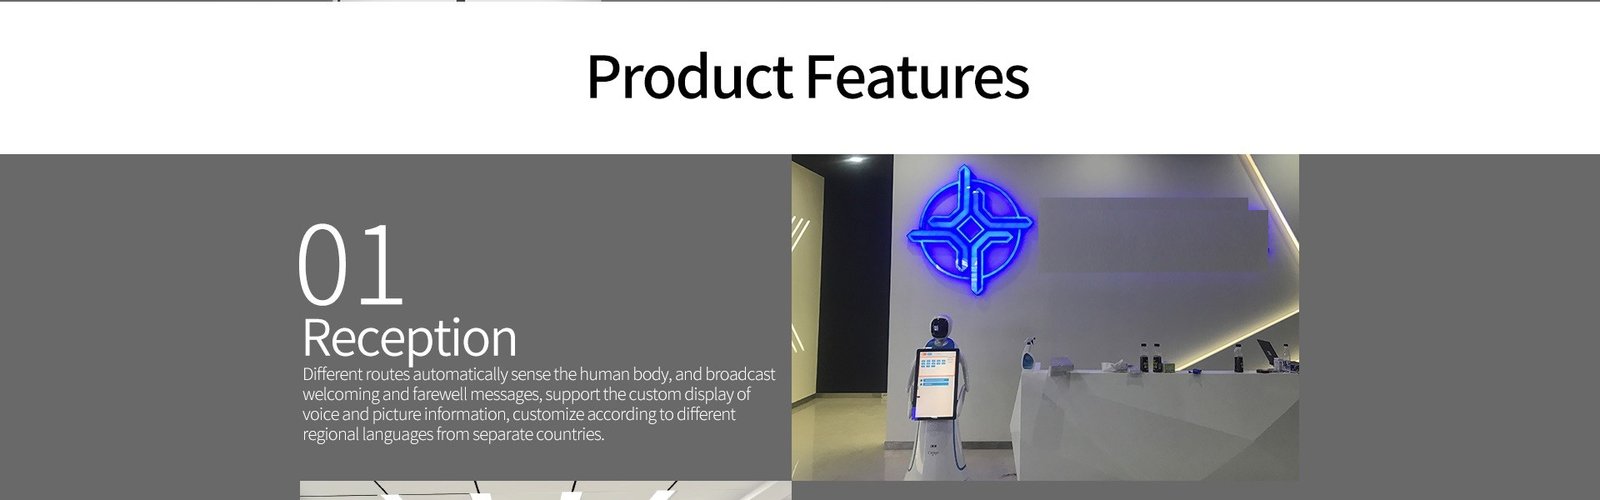 Humanoid Intelligent Commercial Service Robot SIFROBOT-5.3 features3 